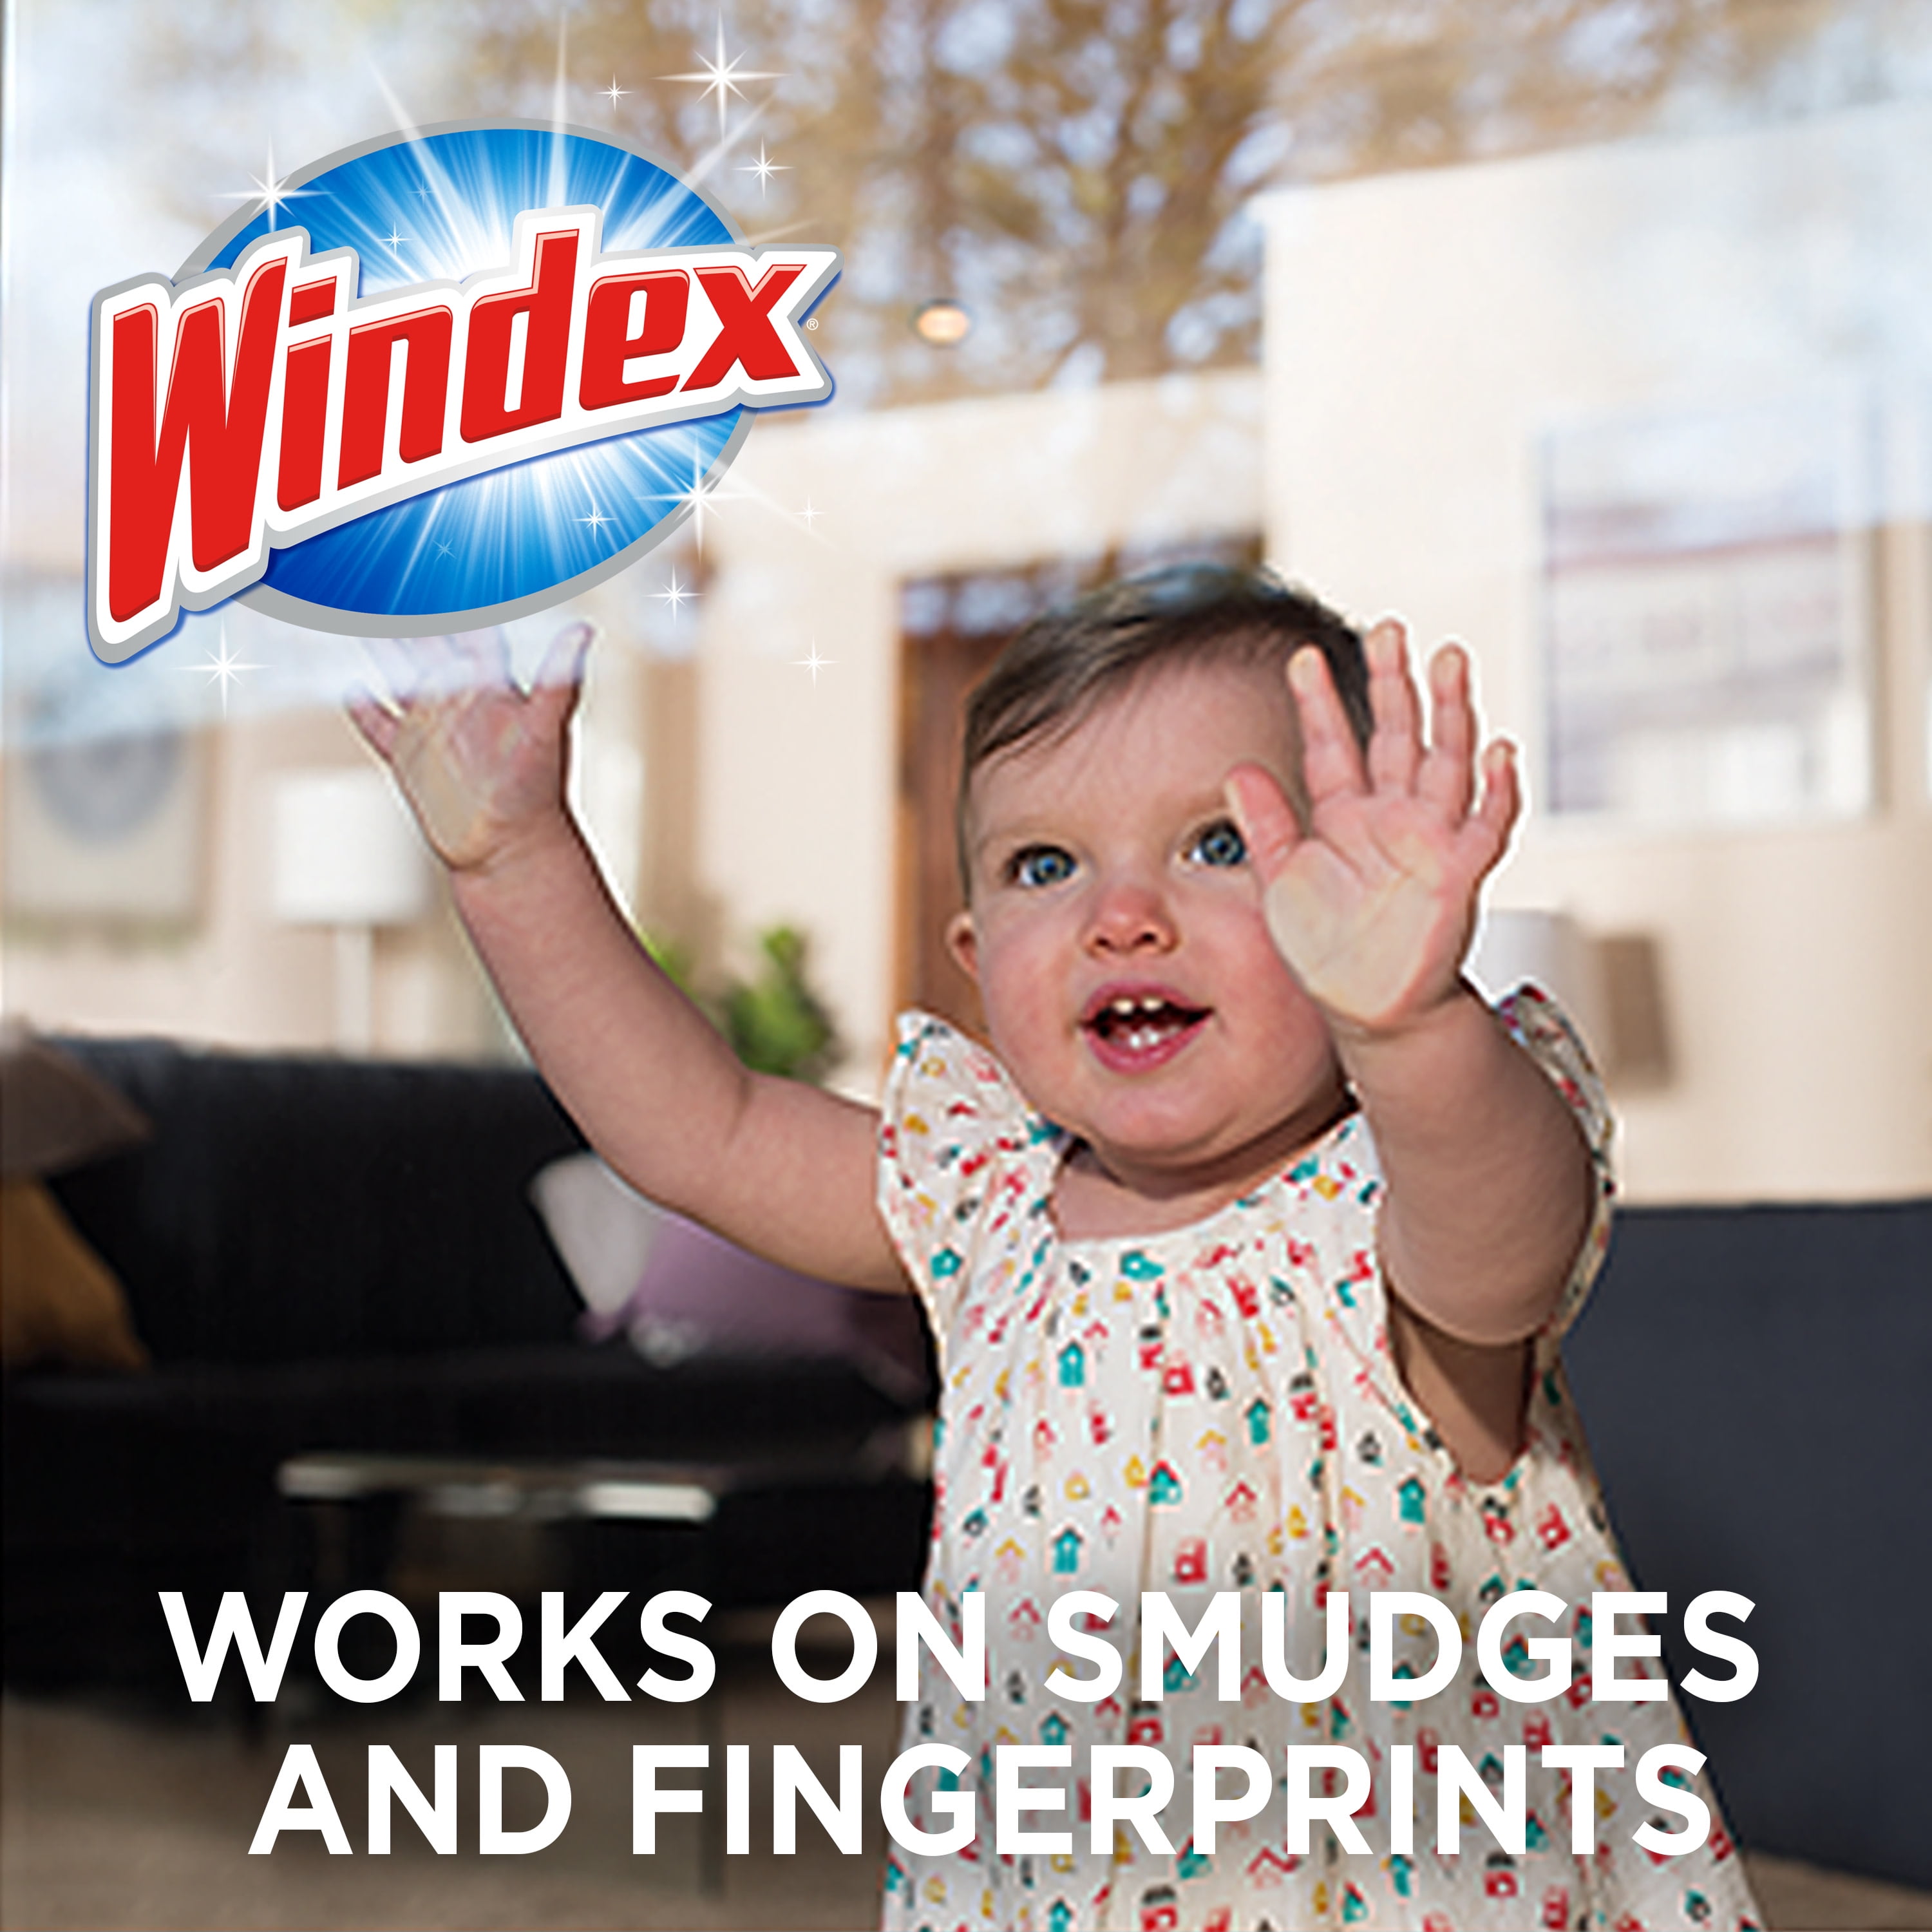 Windex Glass and Surface Pre-Moistened Wipes, Original, 38 Wipes, 3 ct